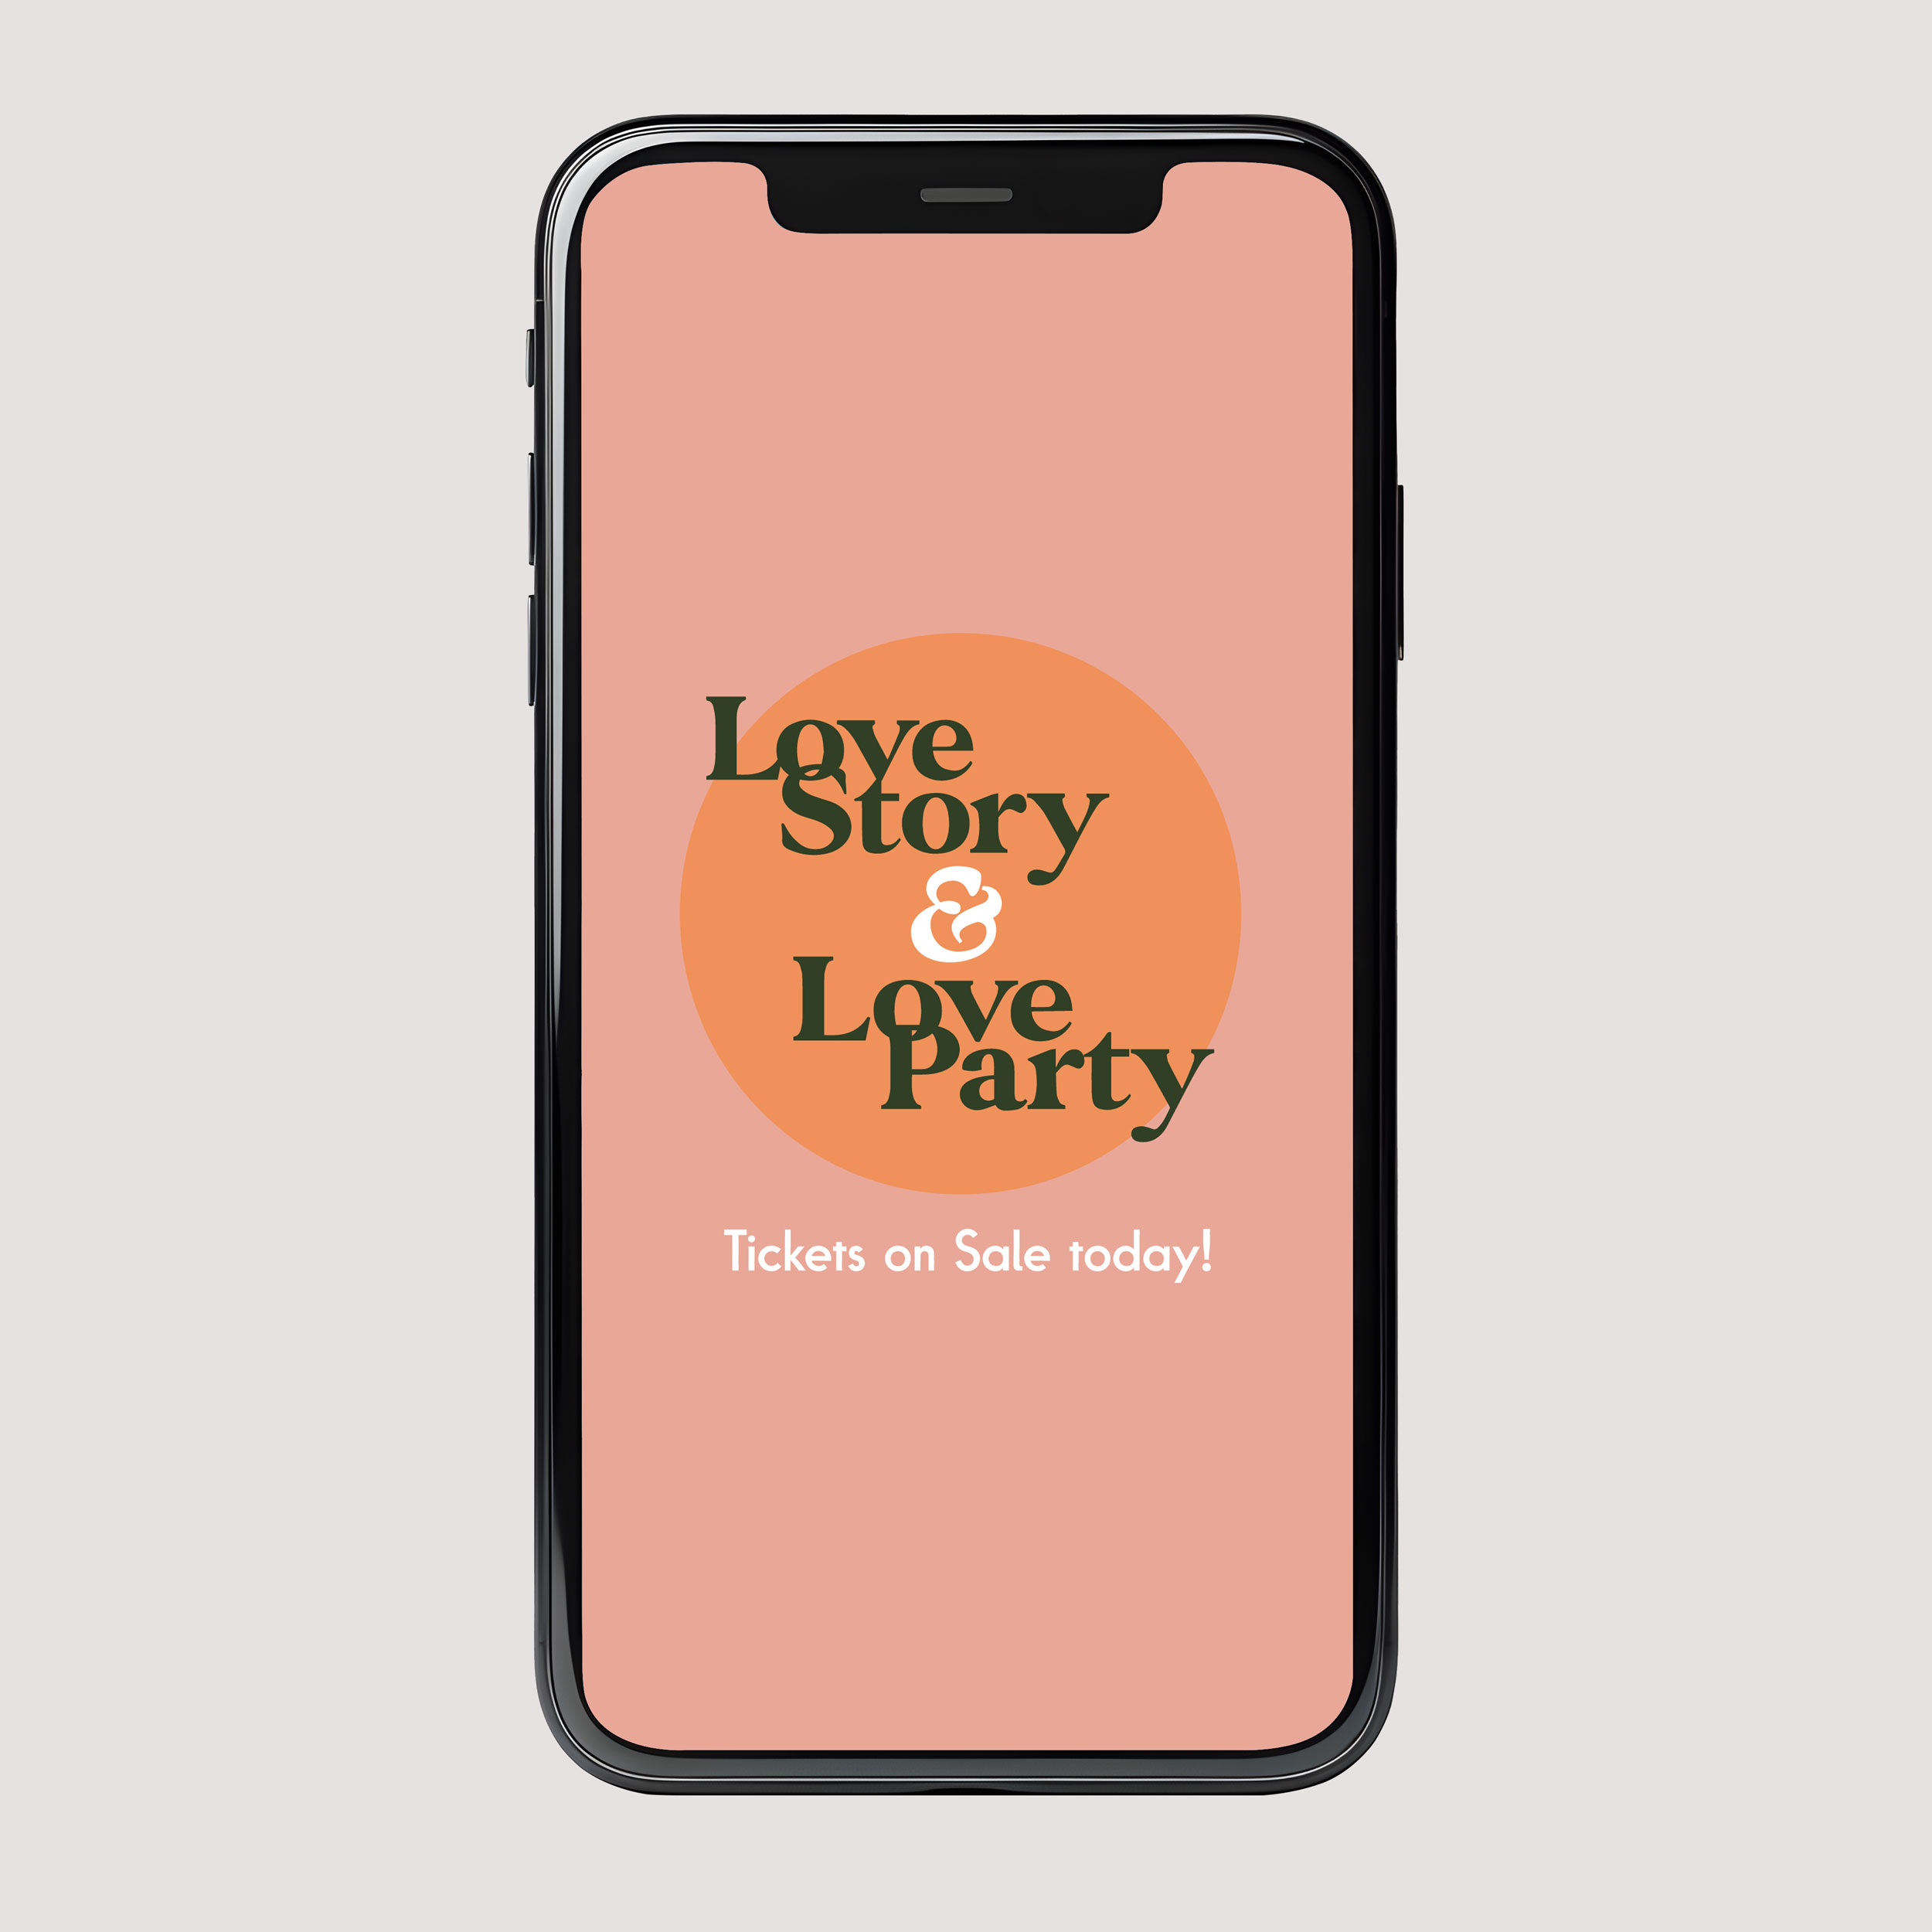 Love-Story-Gathering-Social-Media-Content-Design-by-Studio-Mimi-Moon-Phone-template-Image-by-vector_corp-on-Freepik